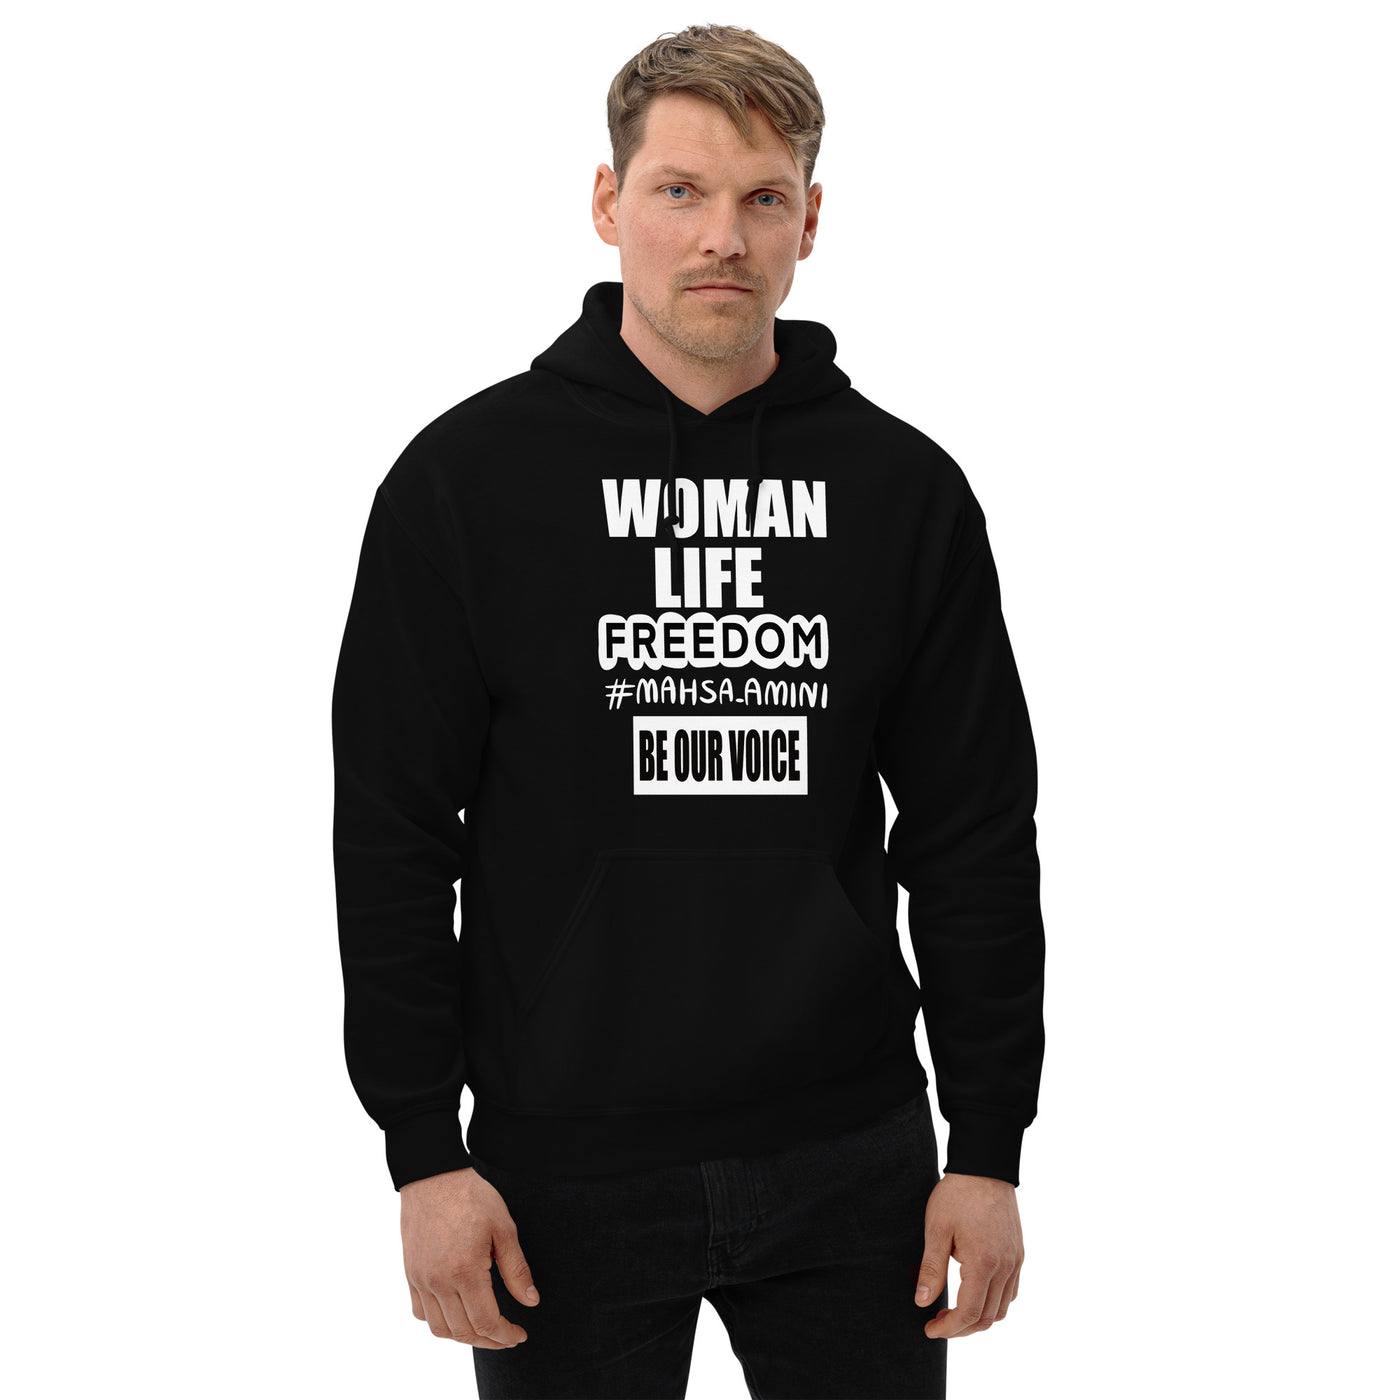 Unisex Hoodie with Woman Life Freedom imprint